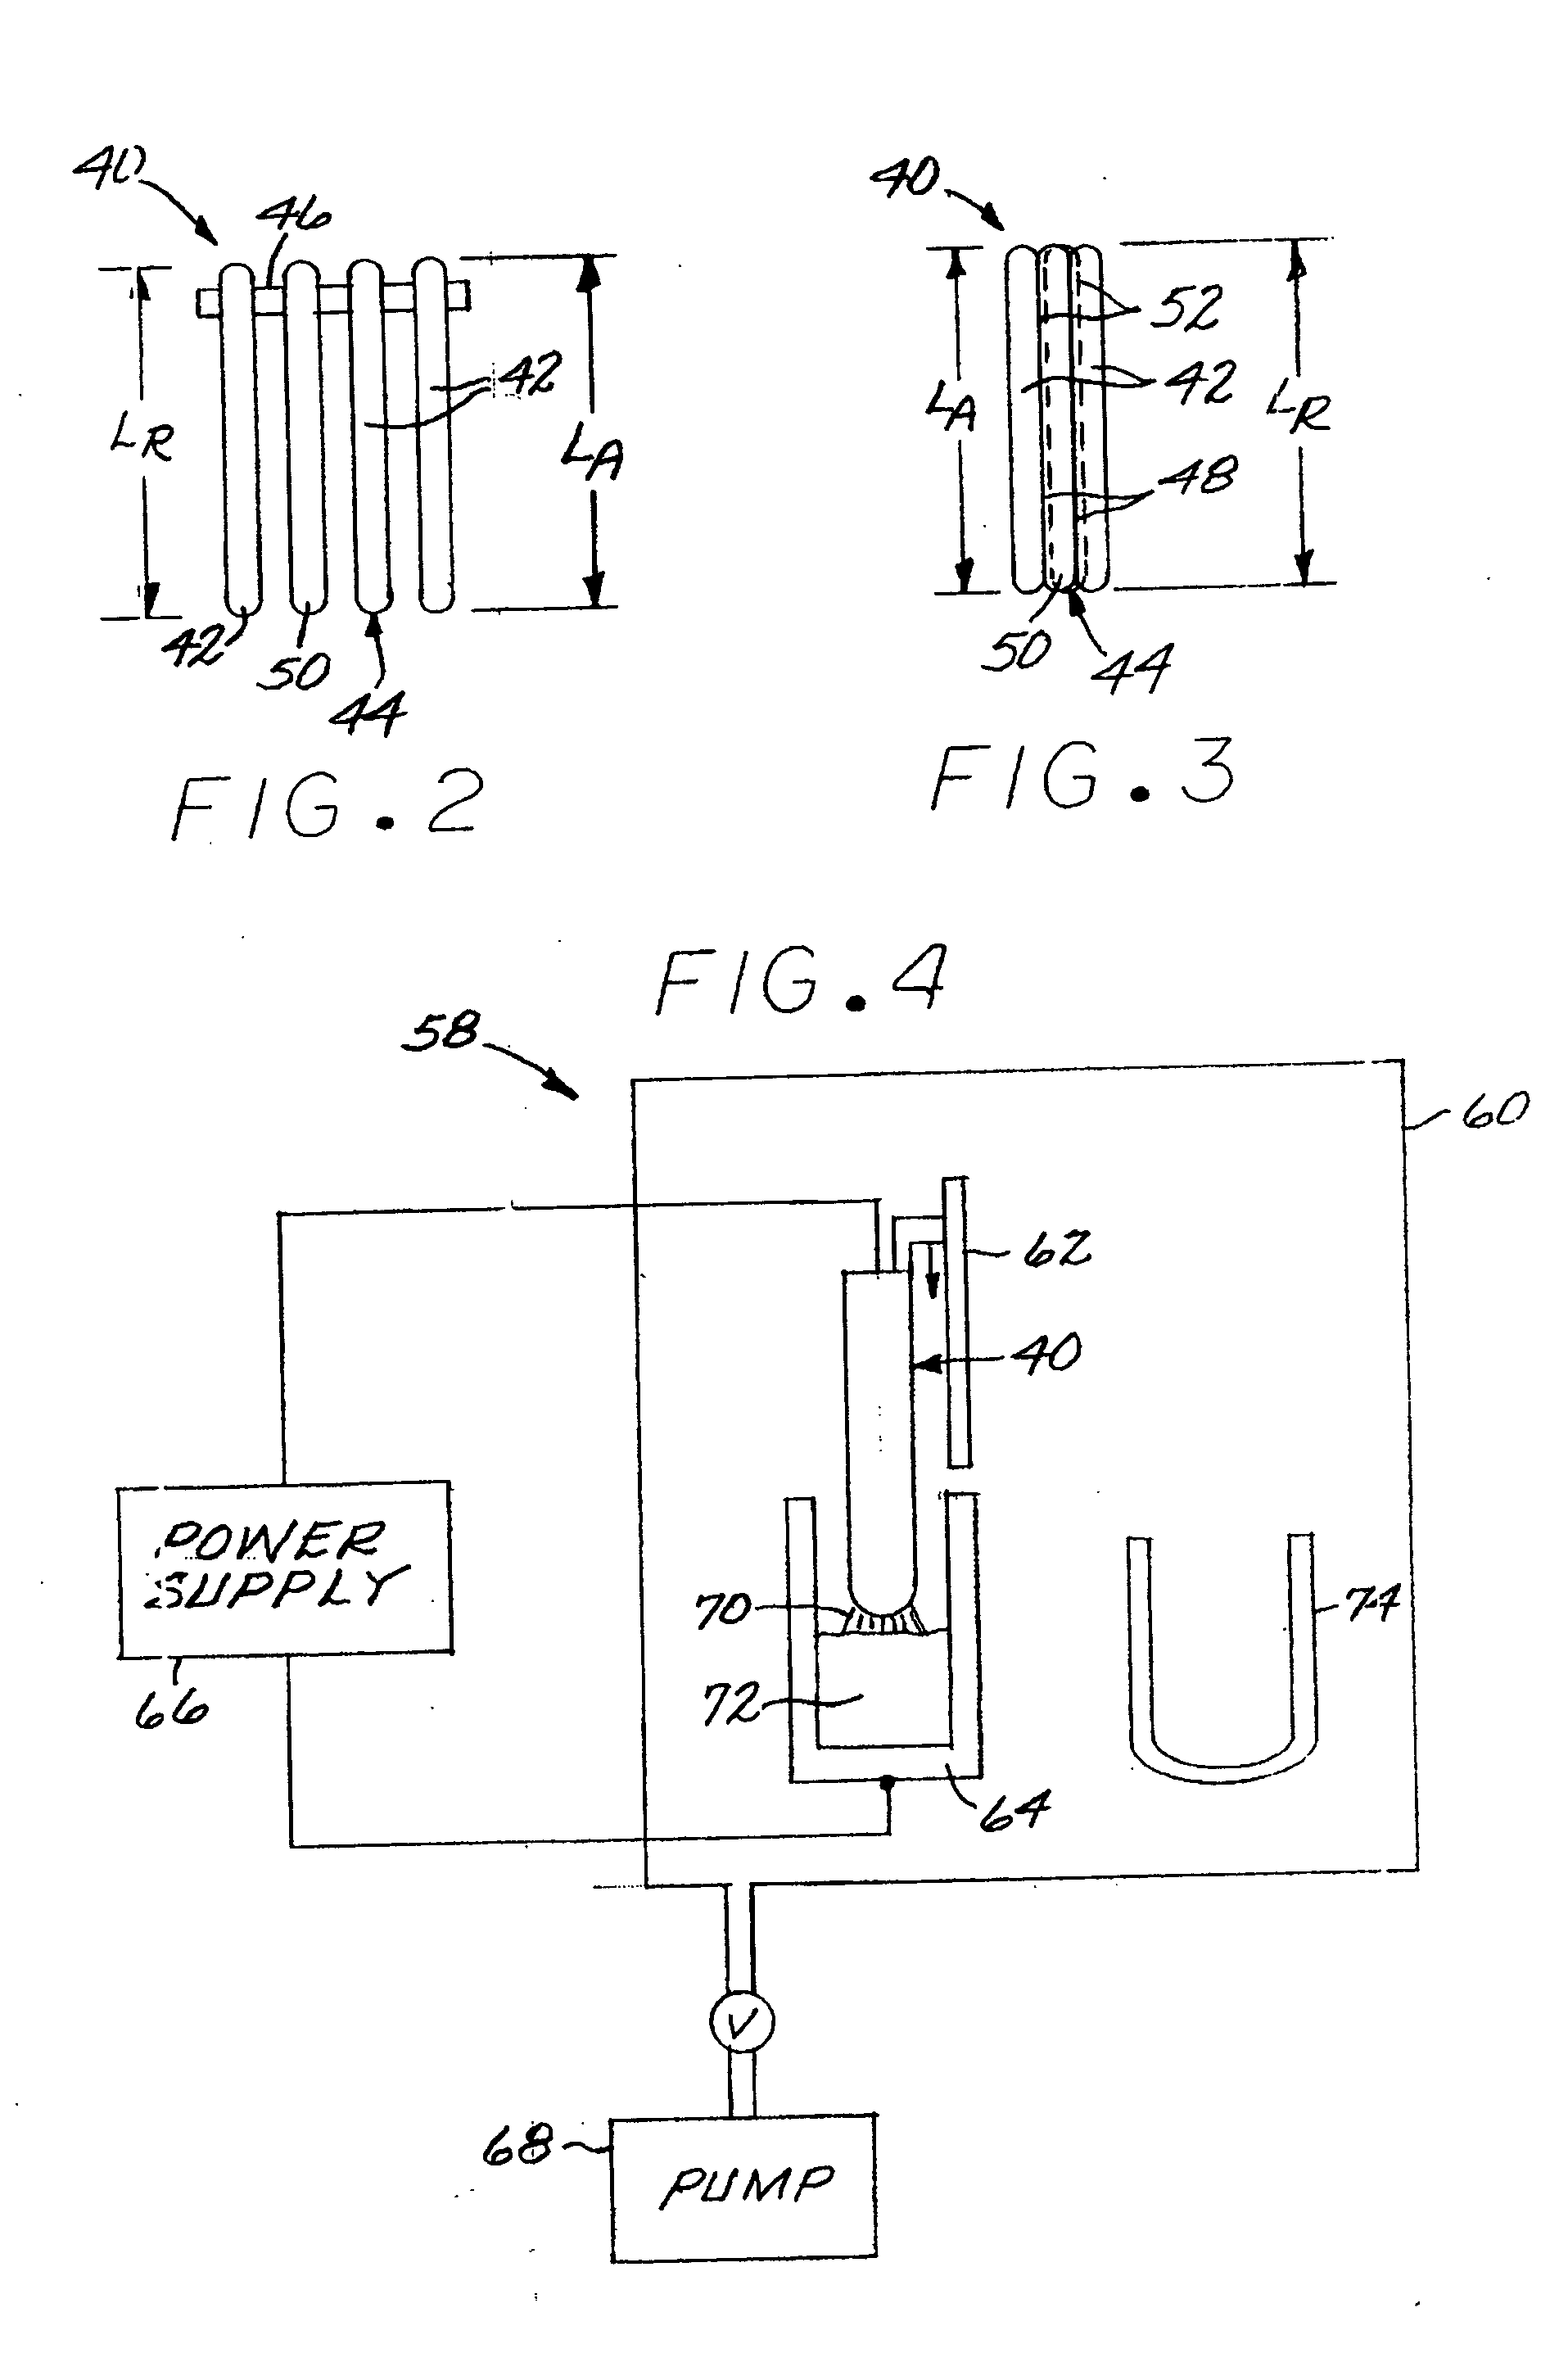 Method for making and using a rod assembly